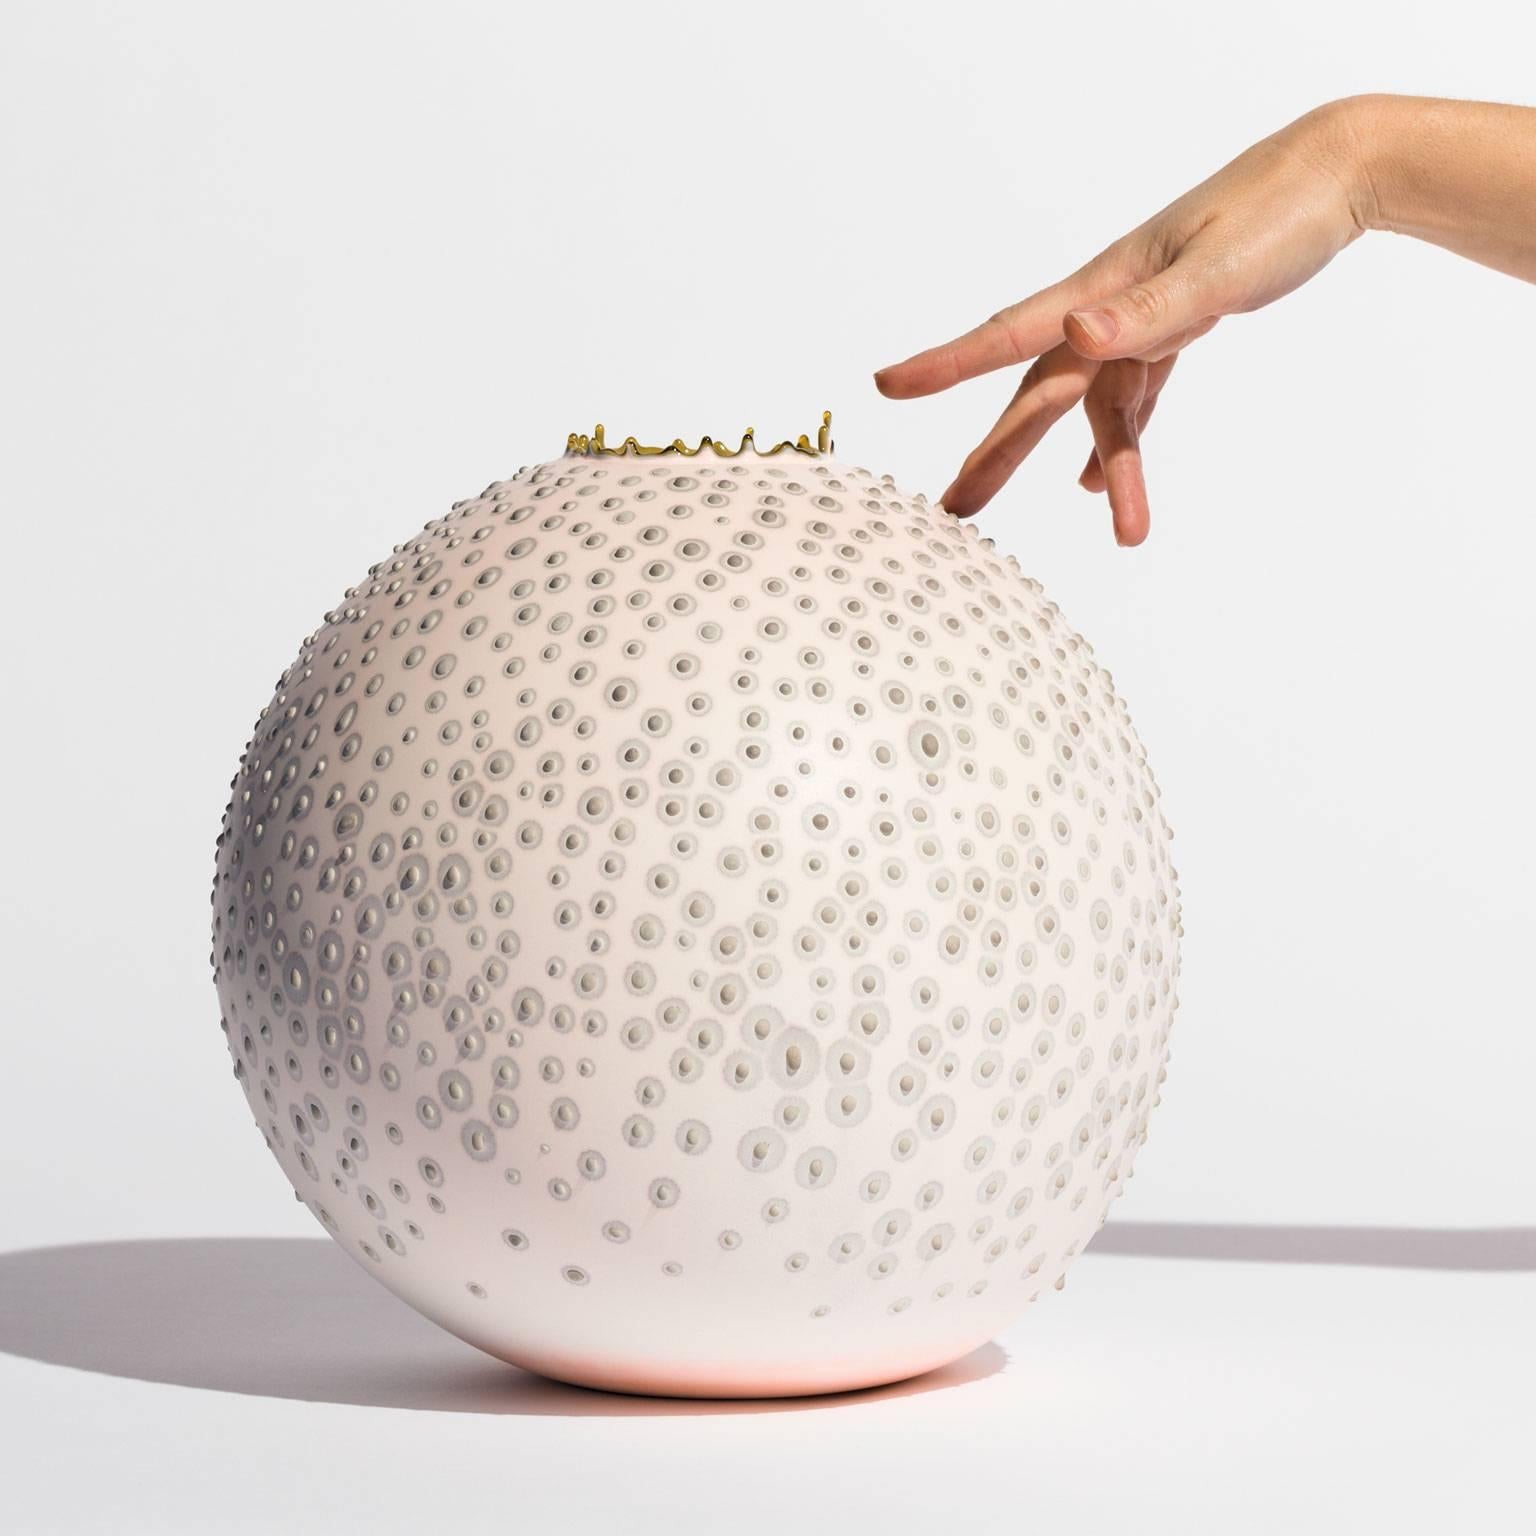 This soft-hued, playful vase is handmade by artist Elyse Graham in her Los Angeles studio.

This collection of vessels is inspired by our incredible and diverse microbiome.

The artist is known for her striking color palette and her proclivity